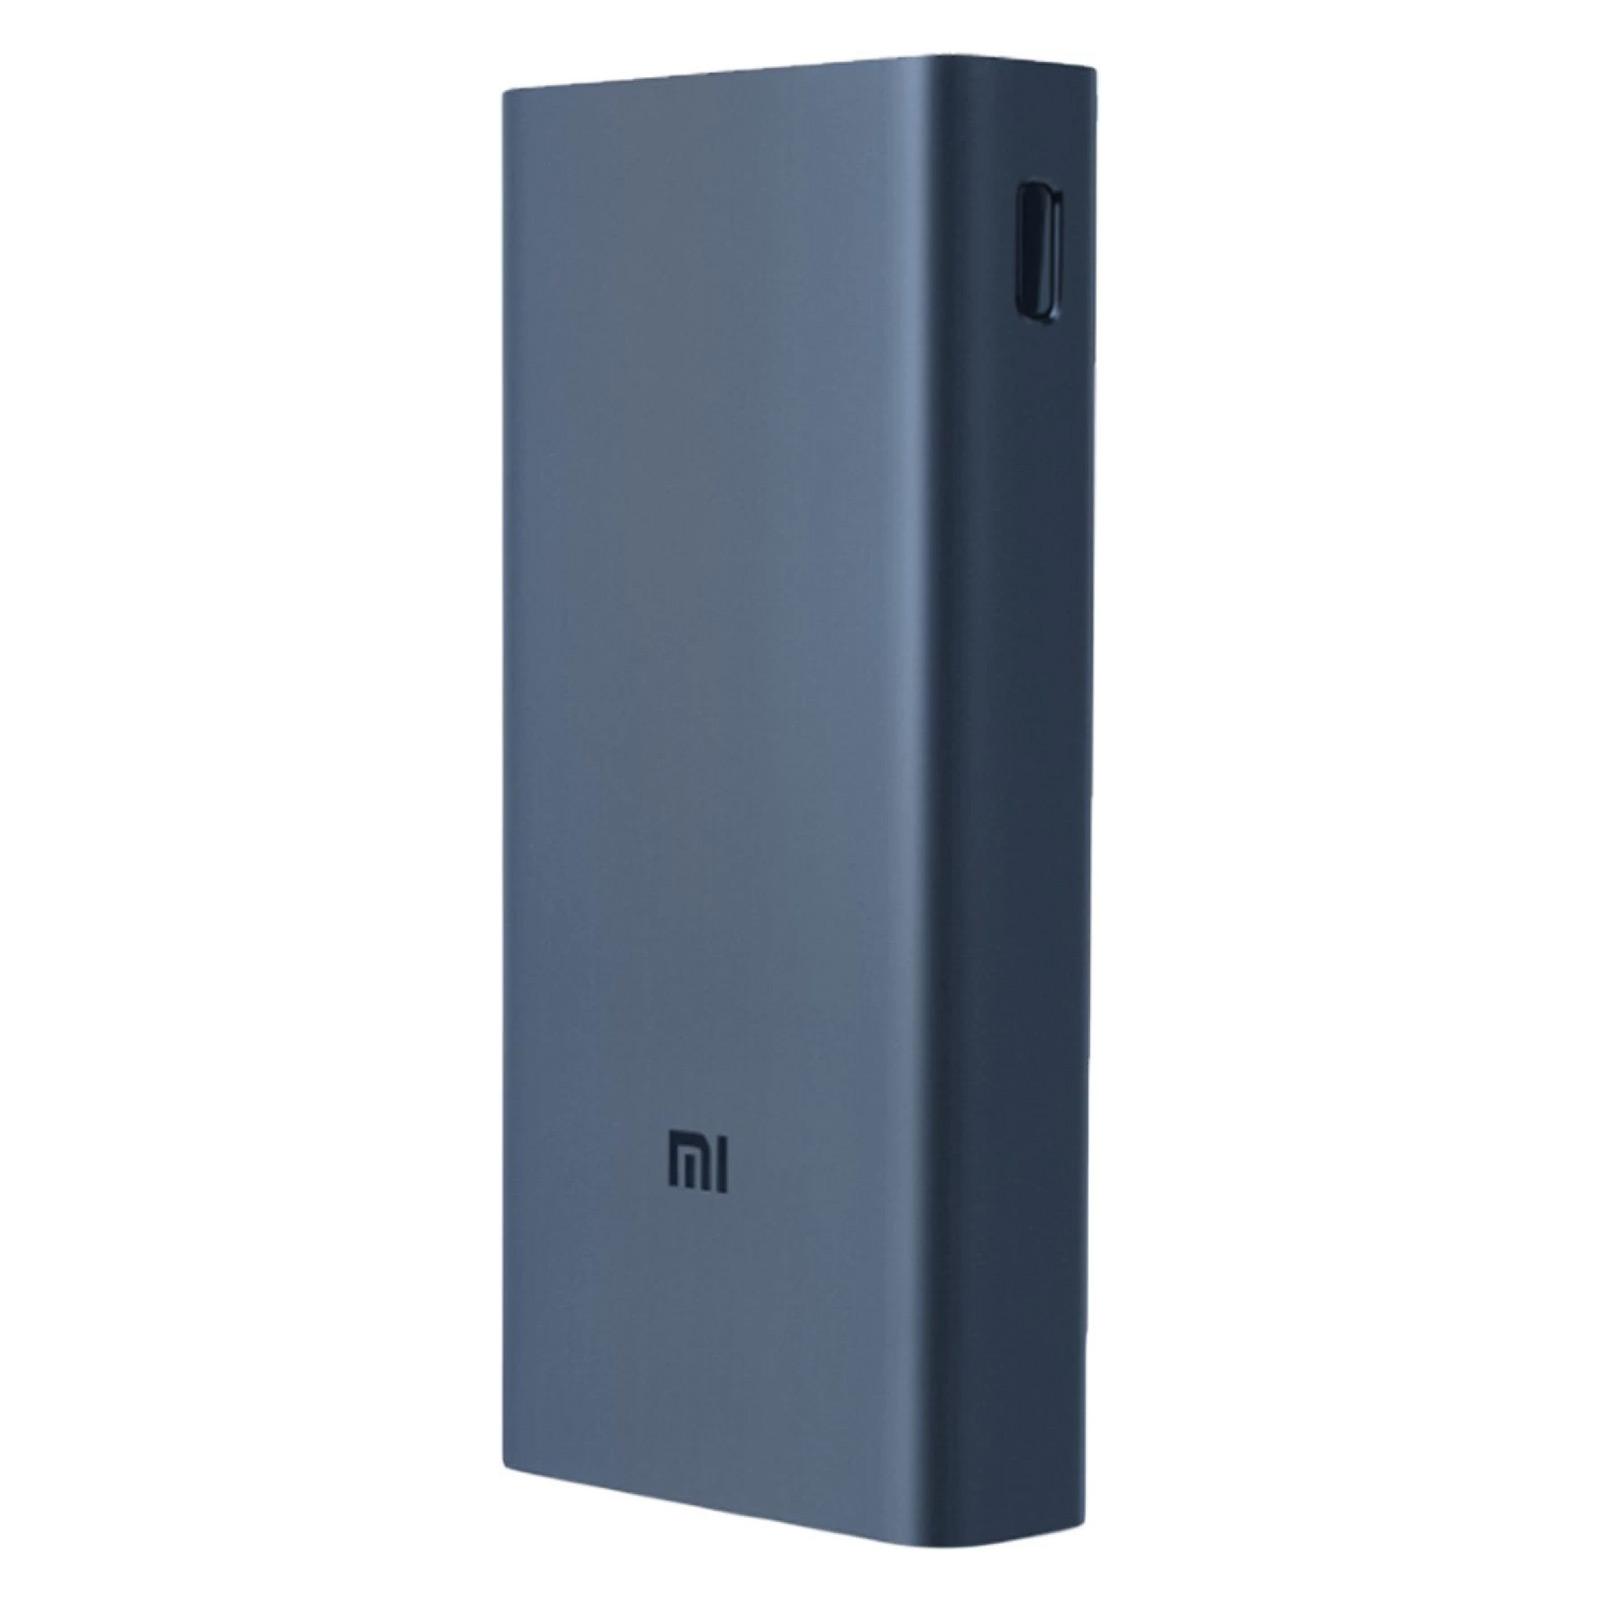 Buy Mi Power Bank 3i Online at best price | Mi 20000 Power | Best Online Shopping India | Mobiles, Laptops, Home Appliances & more at Best Offers & Deals!